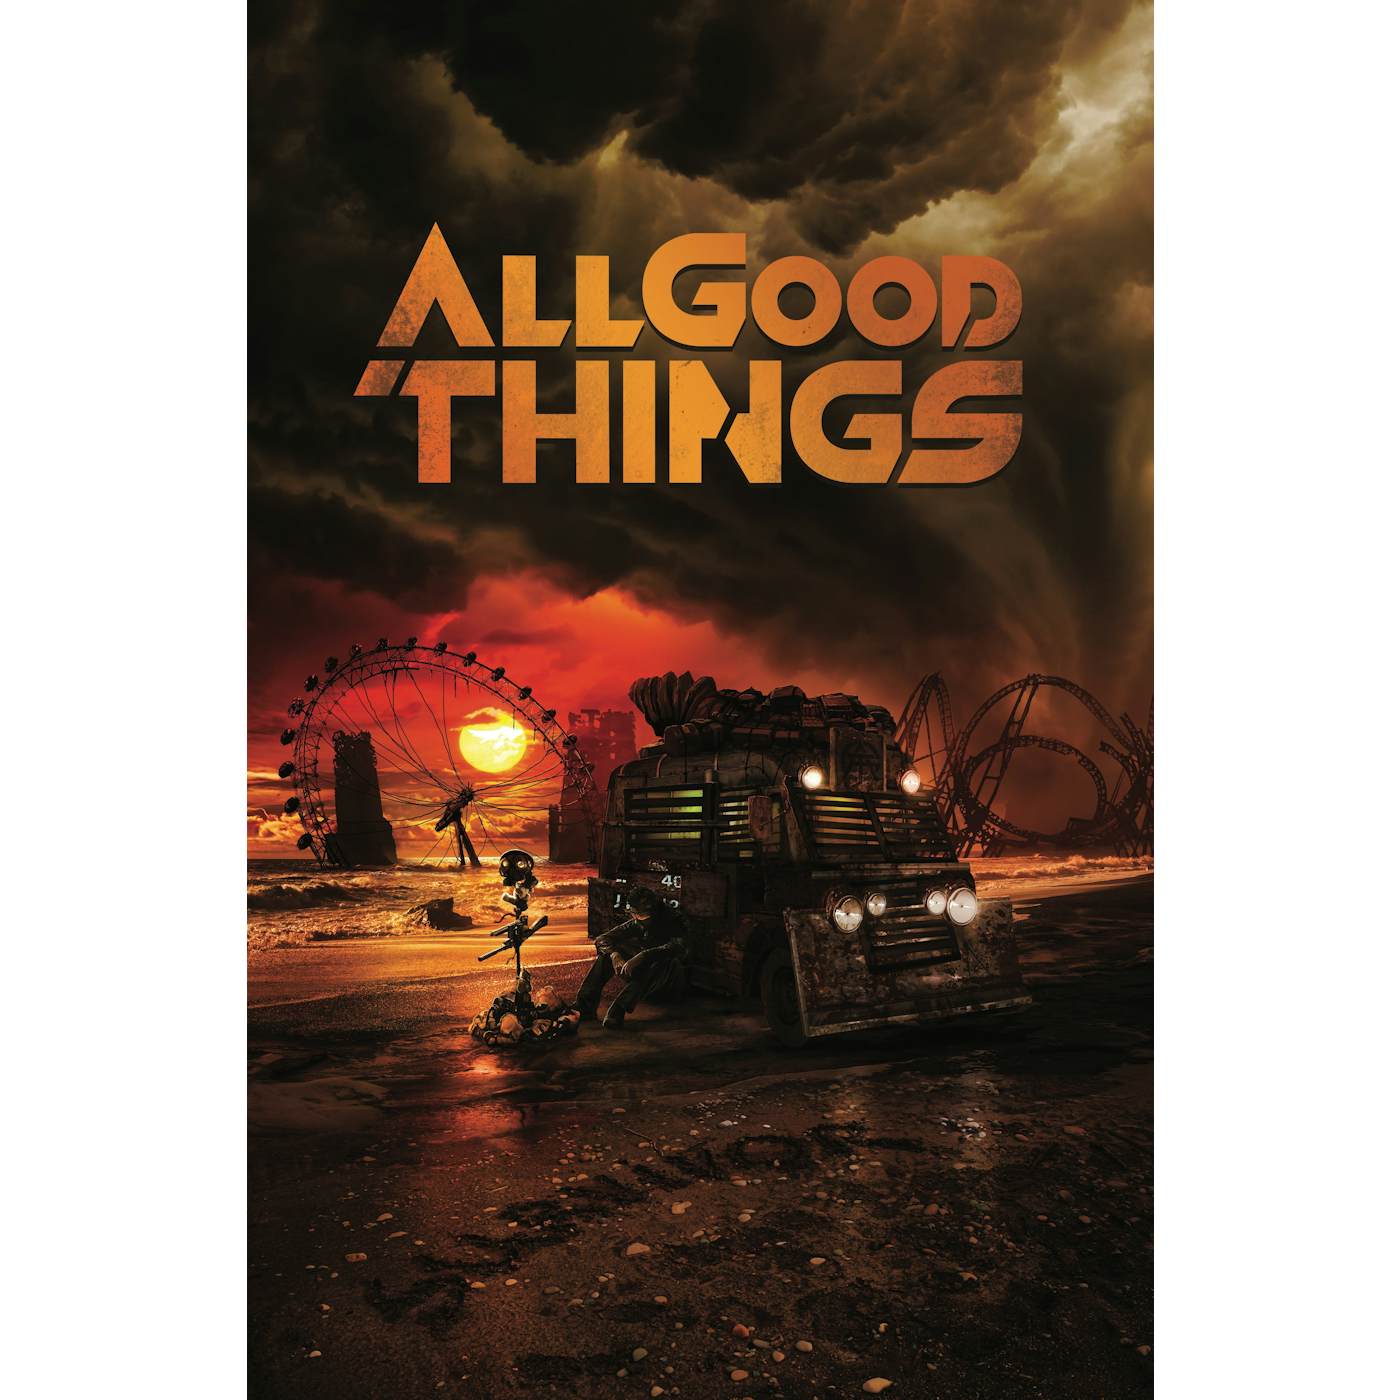 ALL GOOD THINGS - "SURVIVOR" POSTER **SIGNED**